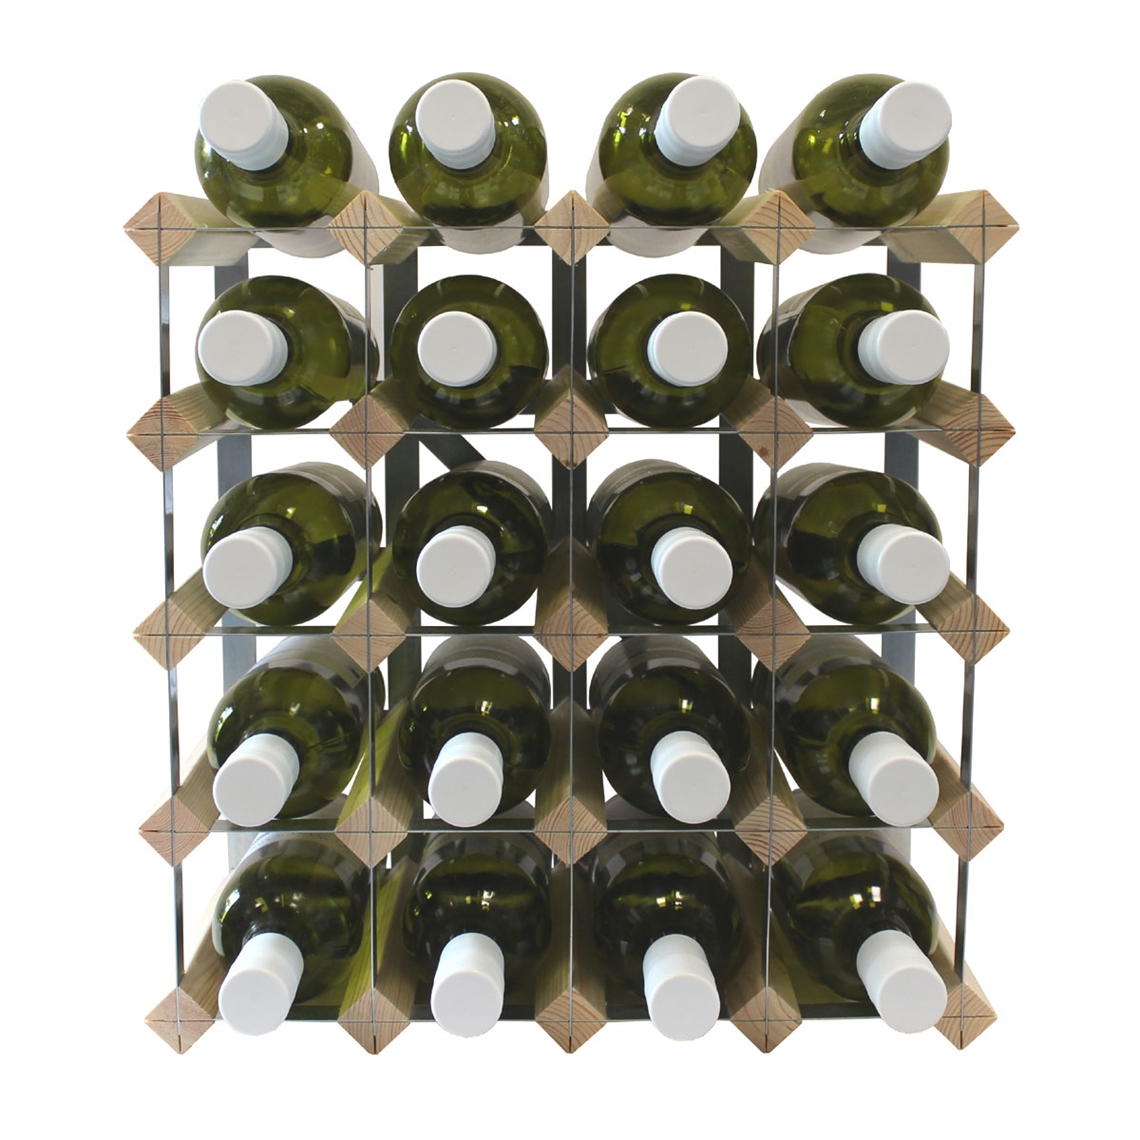 View more custom wine rooms and cellar projects from our Assembled Wine Racks range